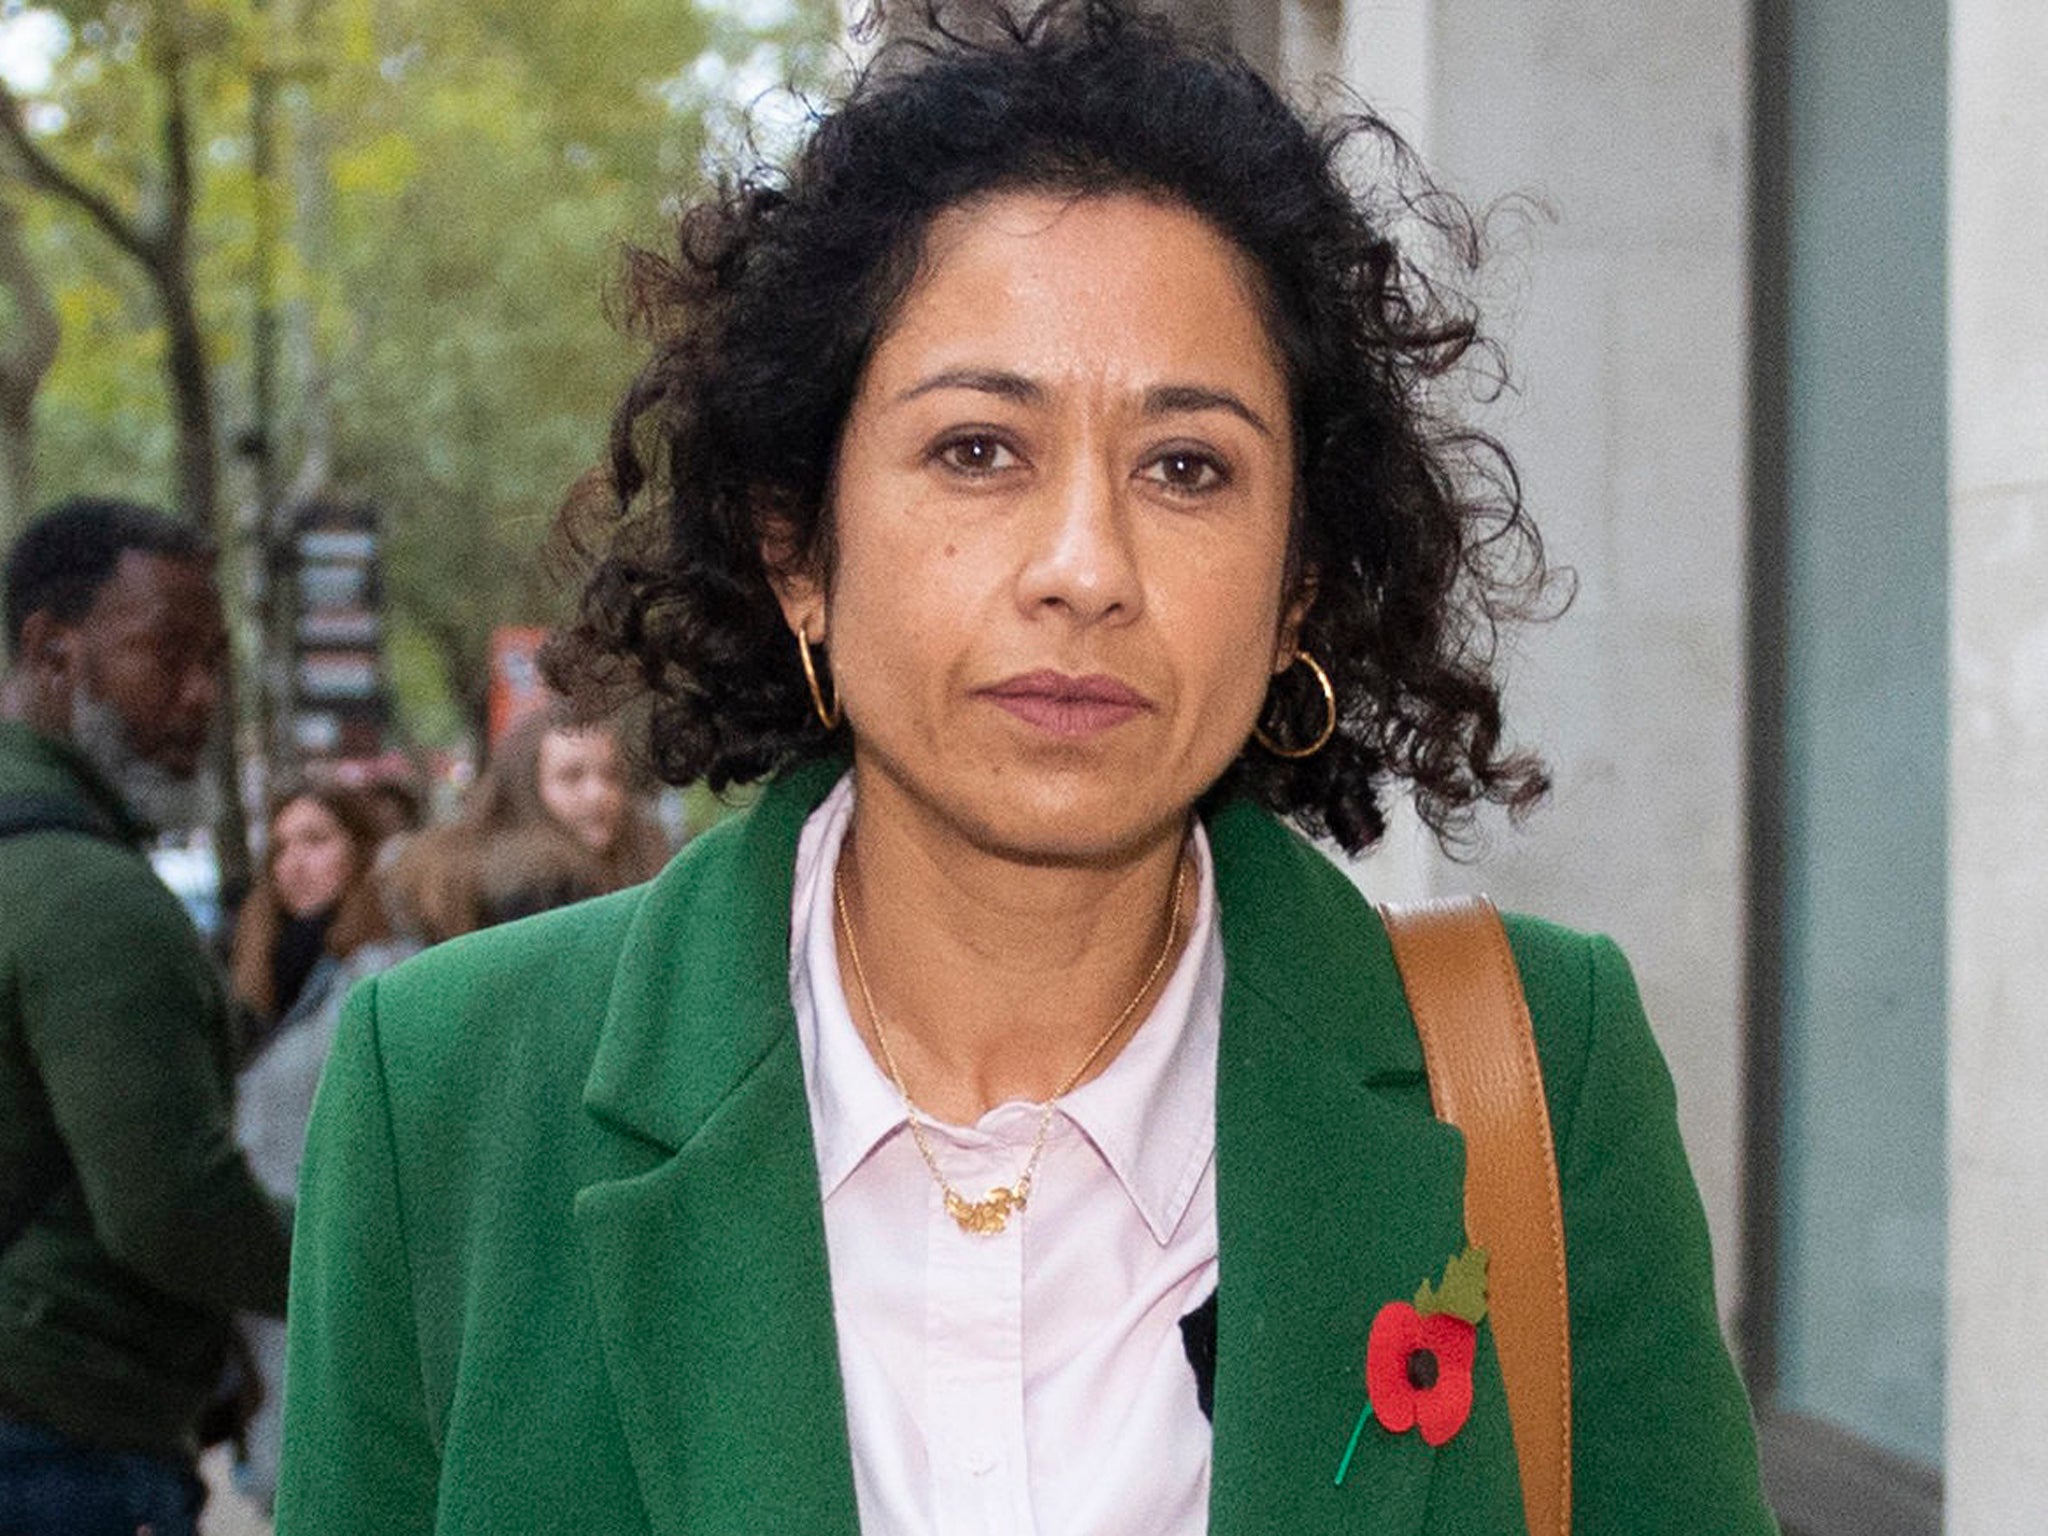 Presenter Samira Ahmed won an employment tribunal against the BBC, which showed she was paid ?700,000 less than Jeremy Vine